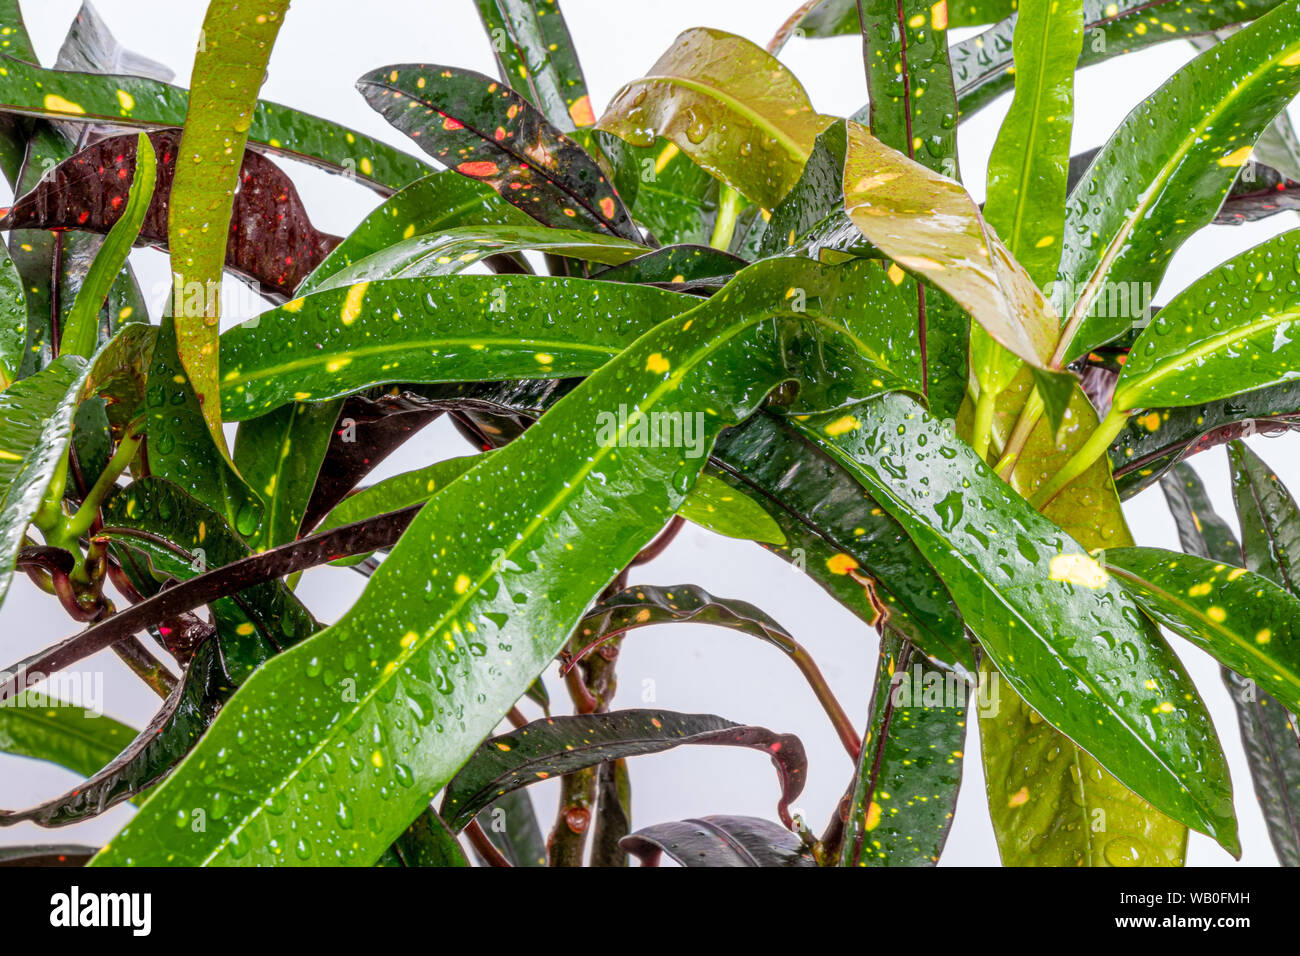 Leaf of Codiaeum Variegatum Tree Croton Plant, Colorful green and yellow leafs on white background. Stock Photo